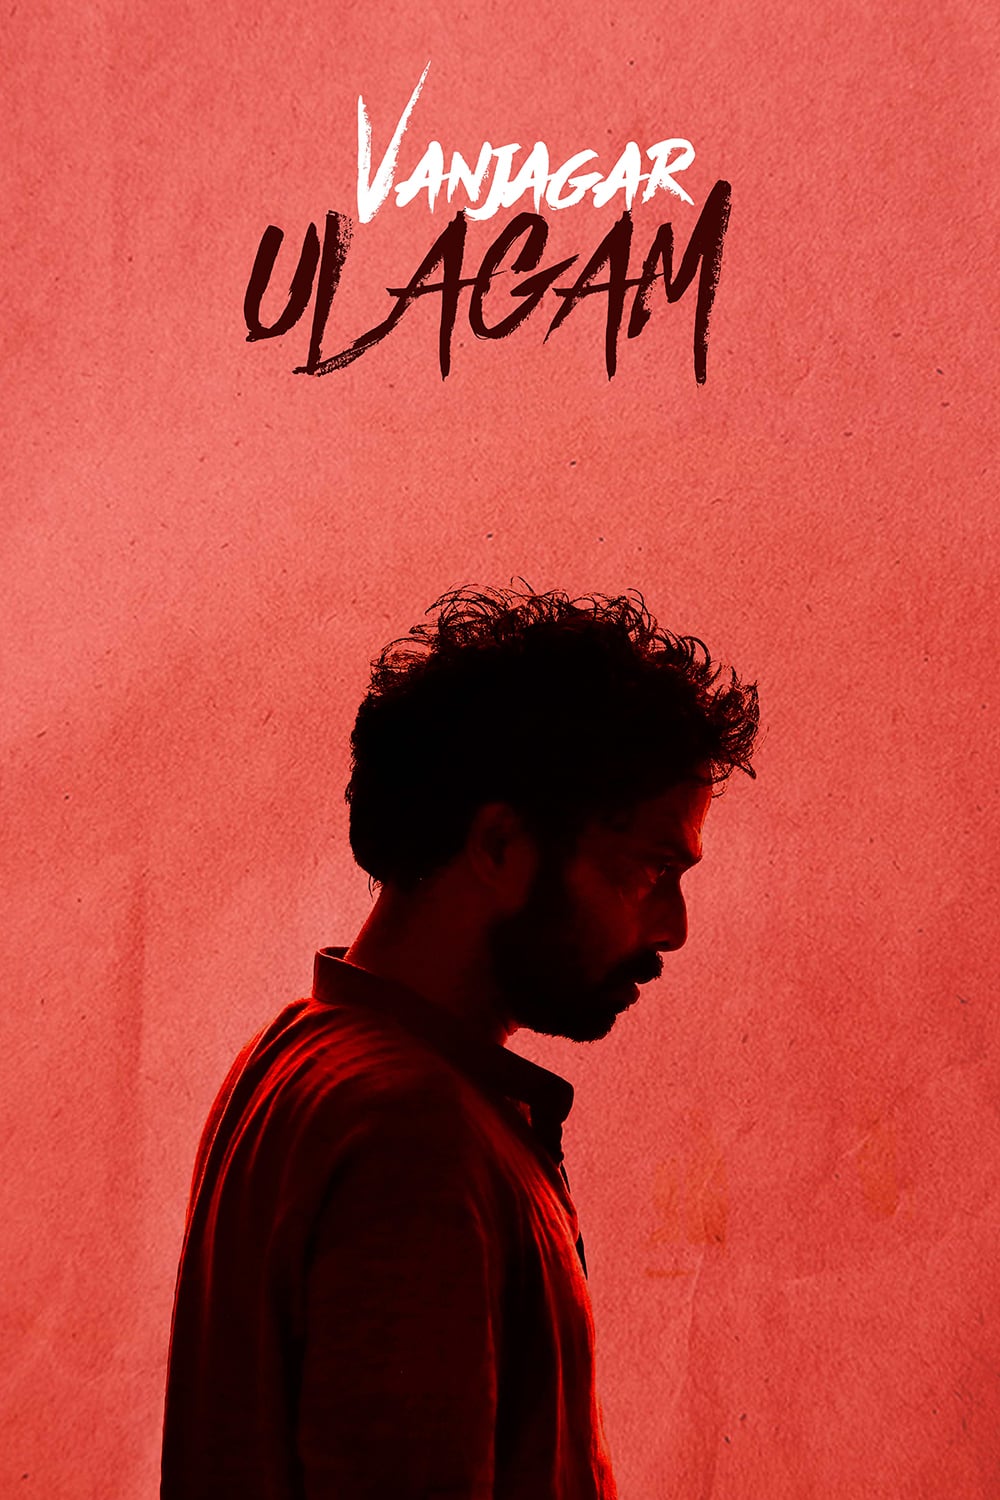 Poster for the movie "Vanjagar Ulagam"